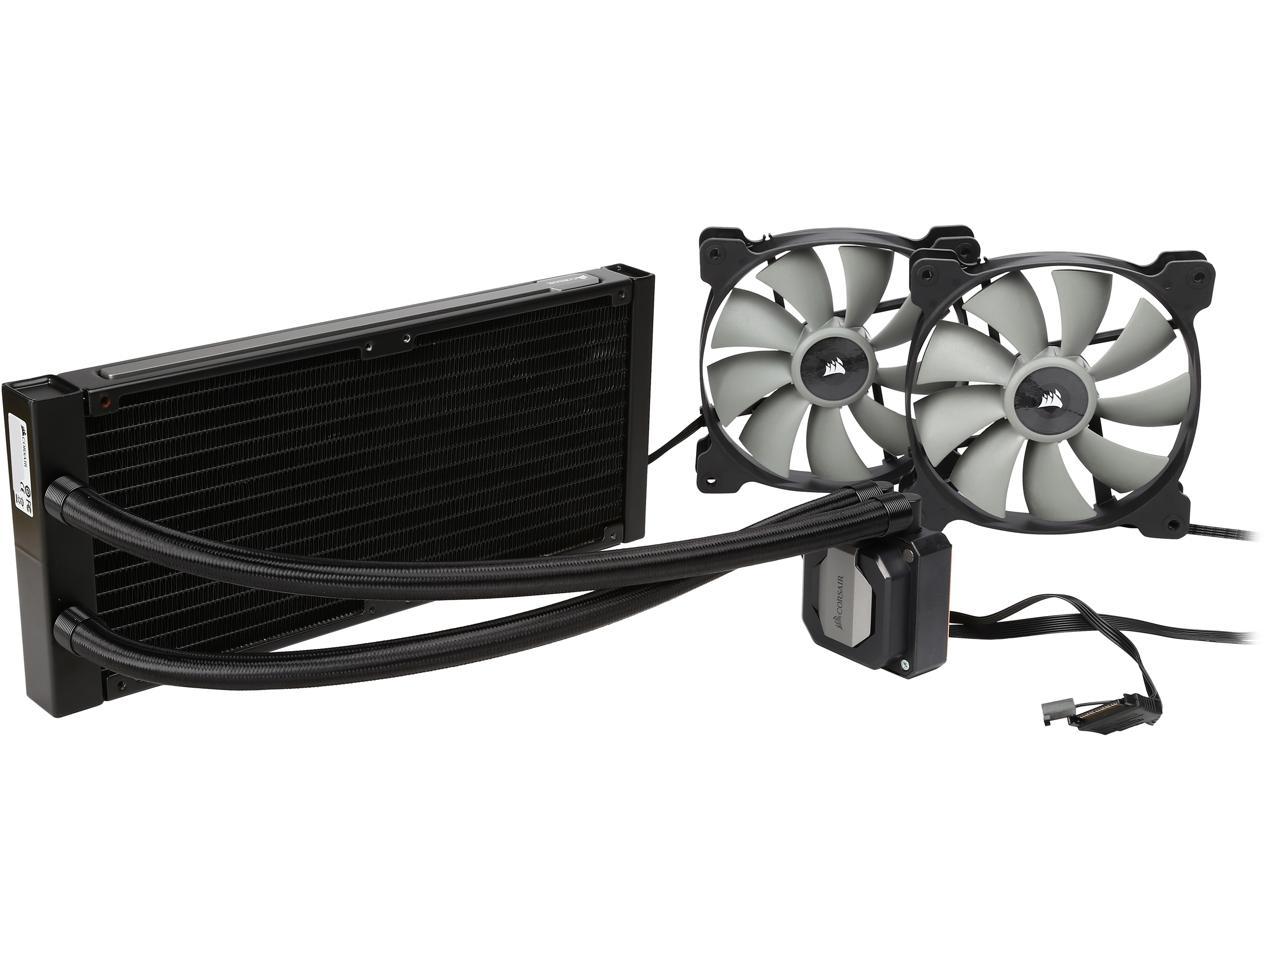 Hydro Series H110i Water CPU Cooler Cooling 280mm Newegg.com